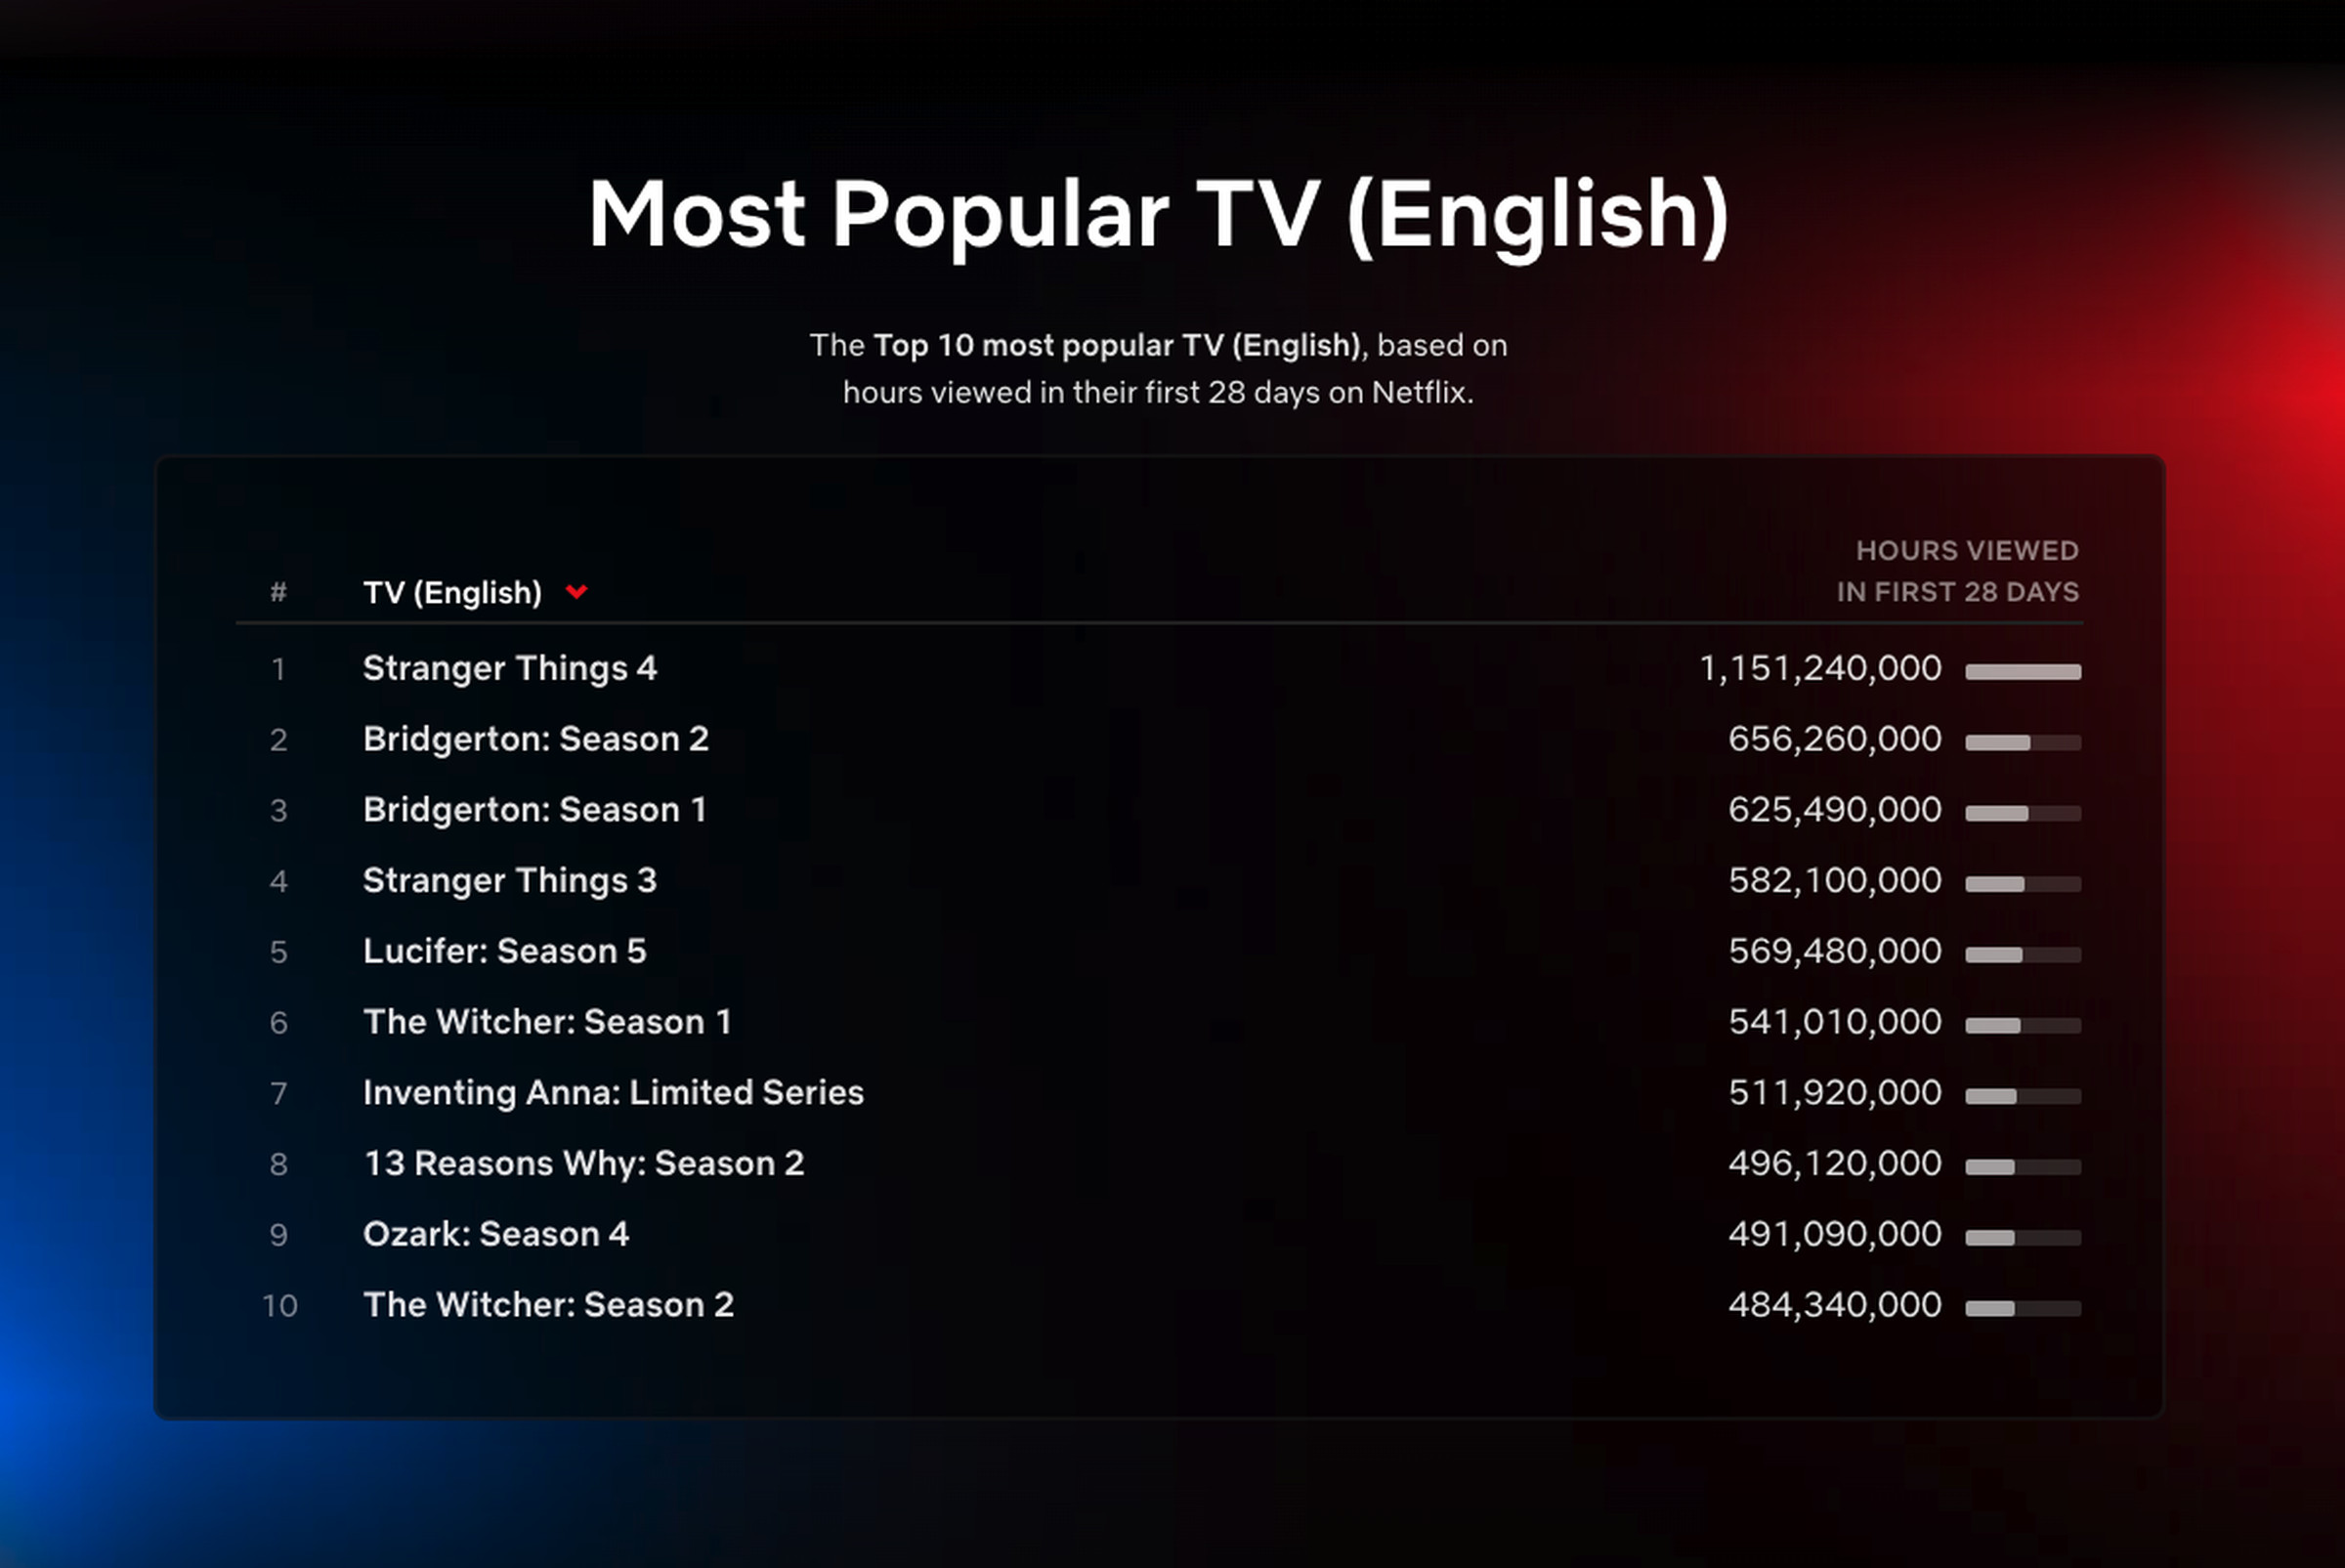 Stranger Things 4 vaulted to the top of Netflix’s all-time most-viewed lists — but only for English shows.